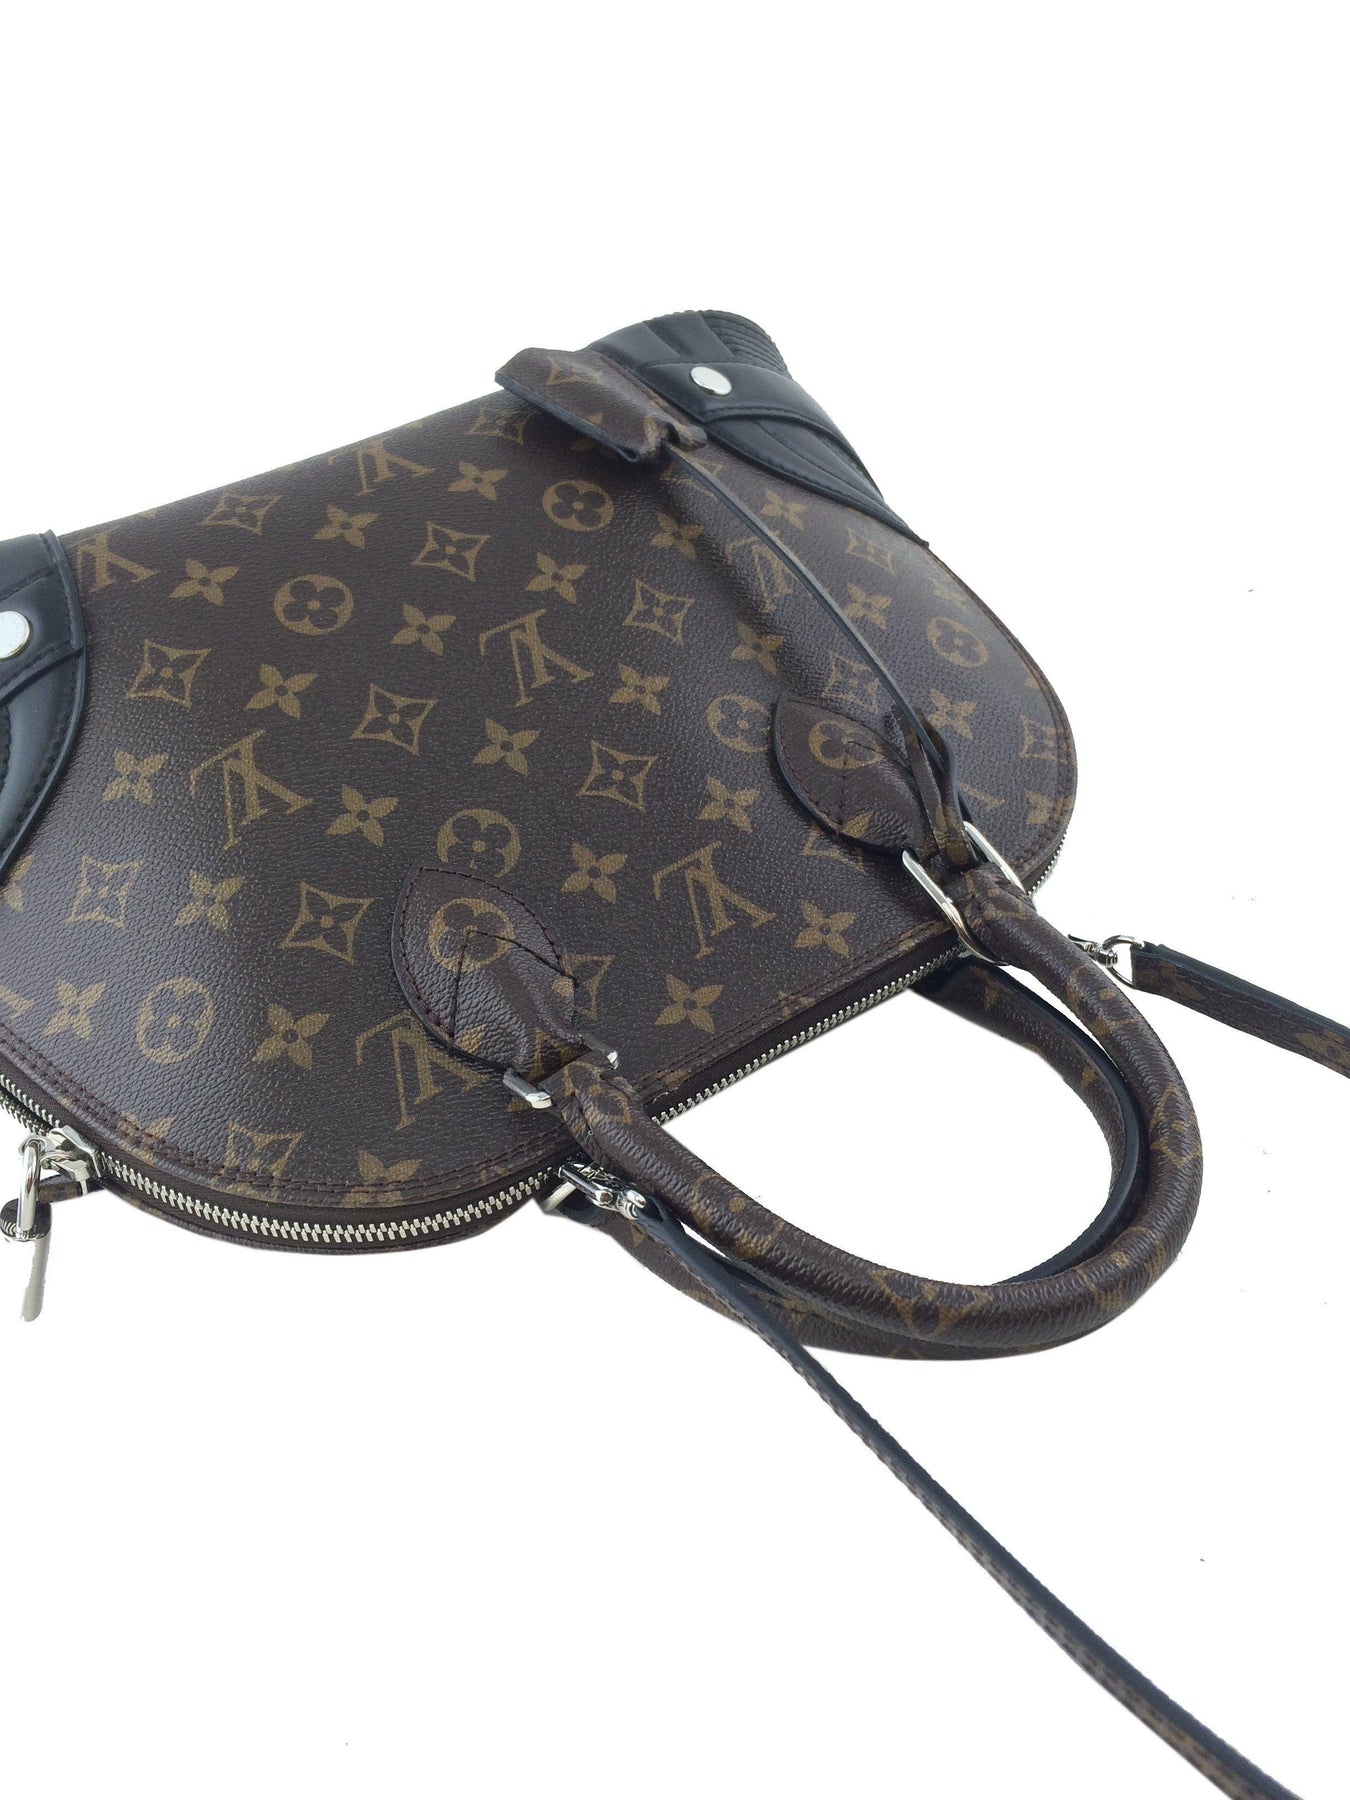 Shine Bright with Louis Vuitton's Alma PM Luxury Monogrammed